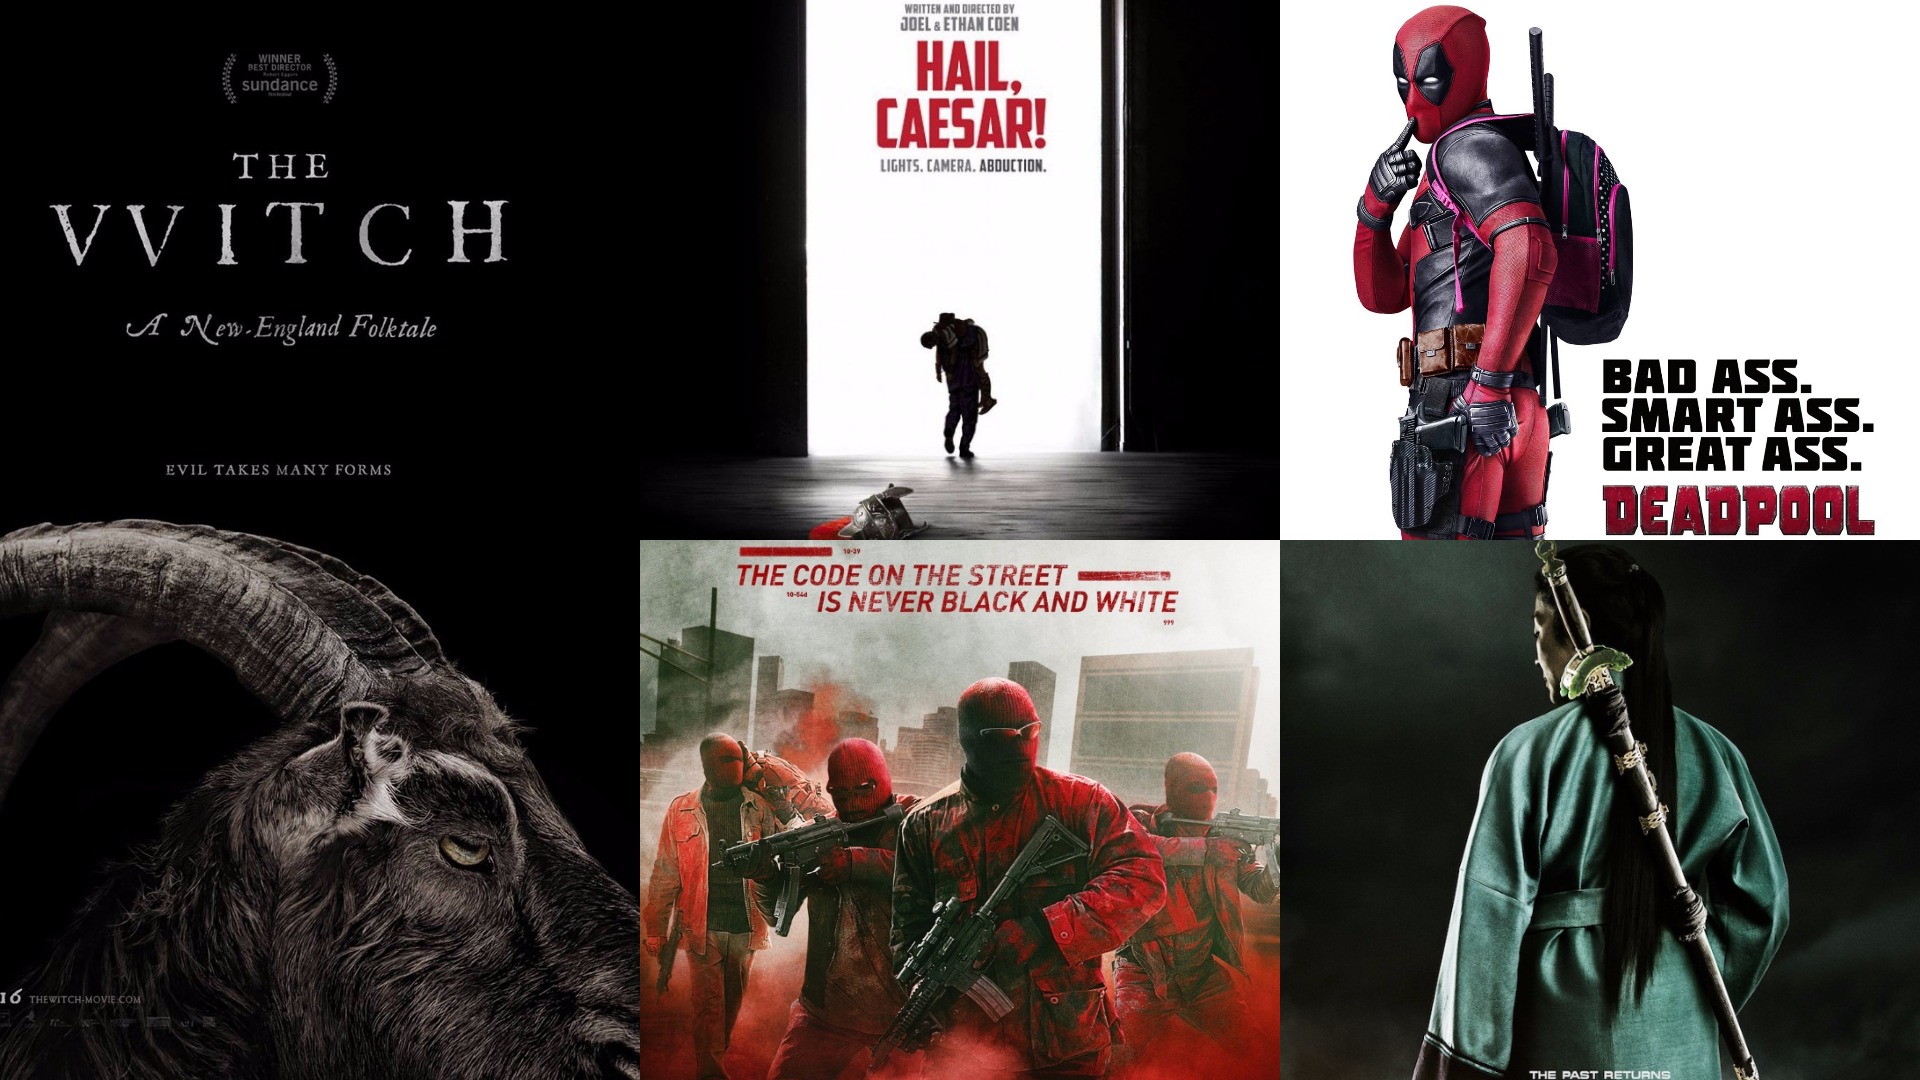 February Movie Releases Daily Superheroes Your daily dose of